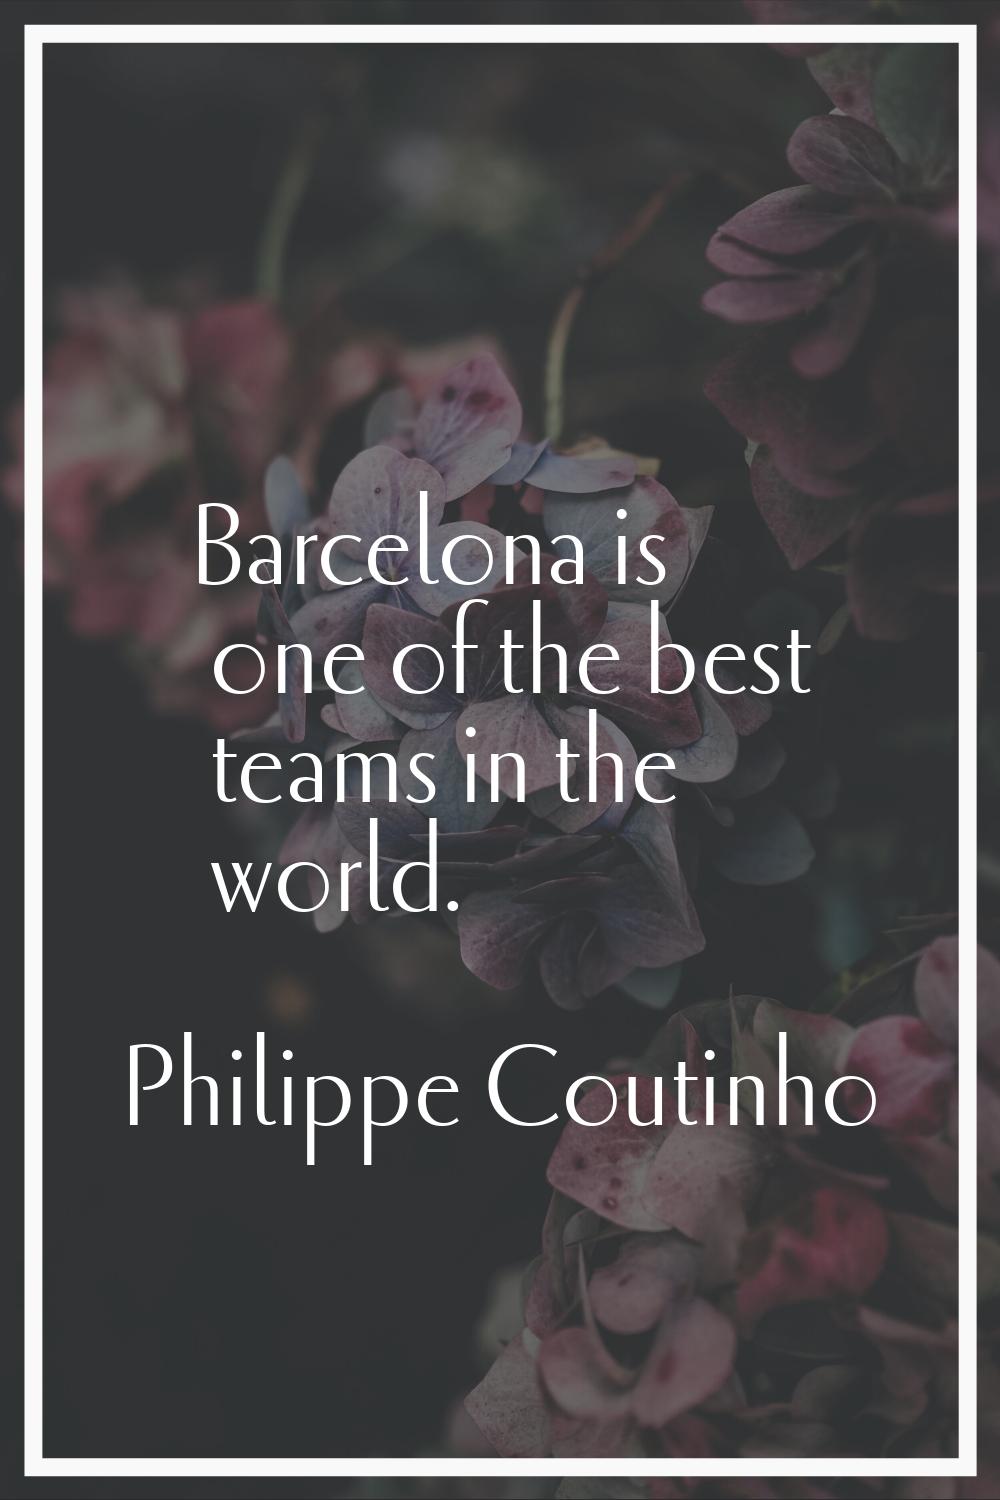 Barcelona is one of the best teams in the world.